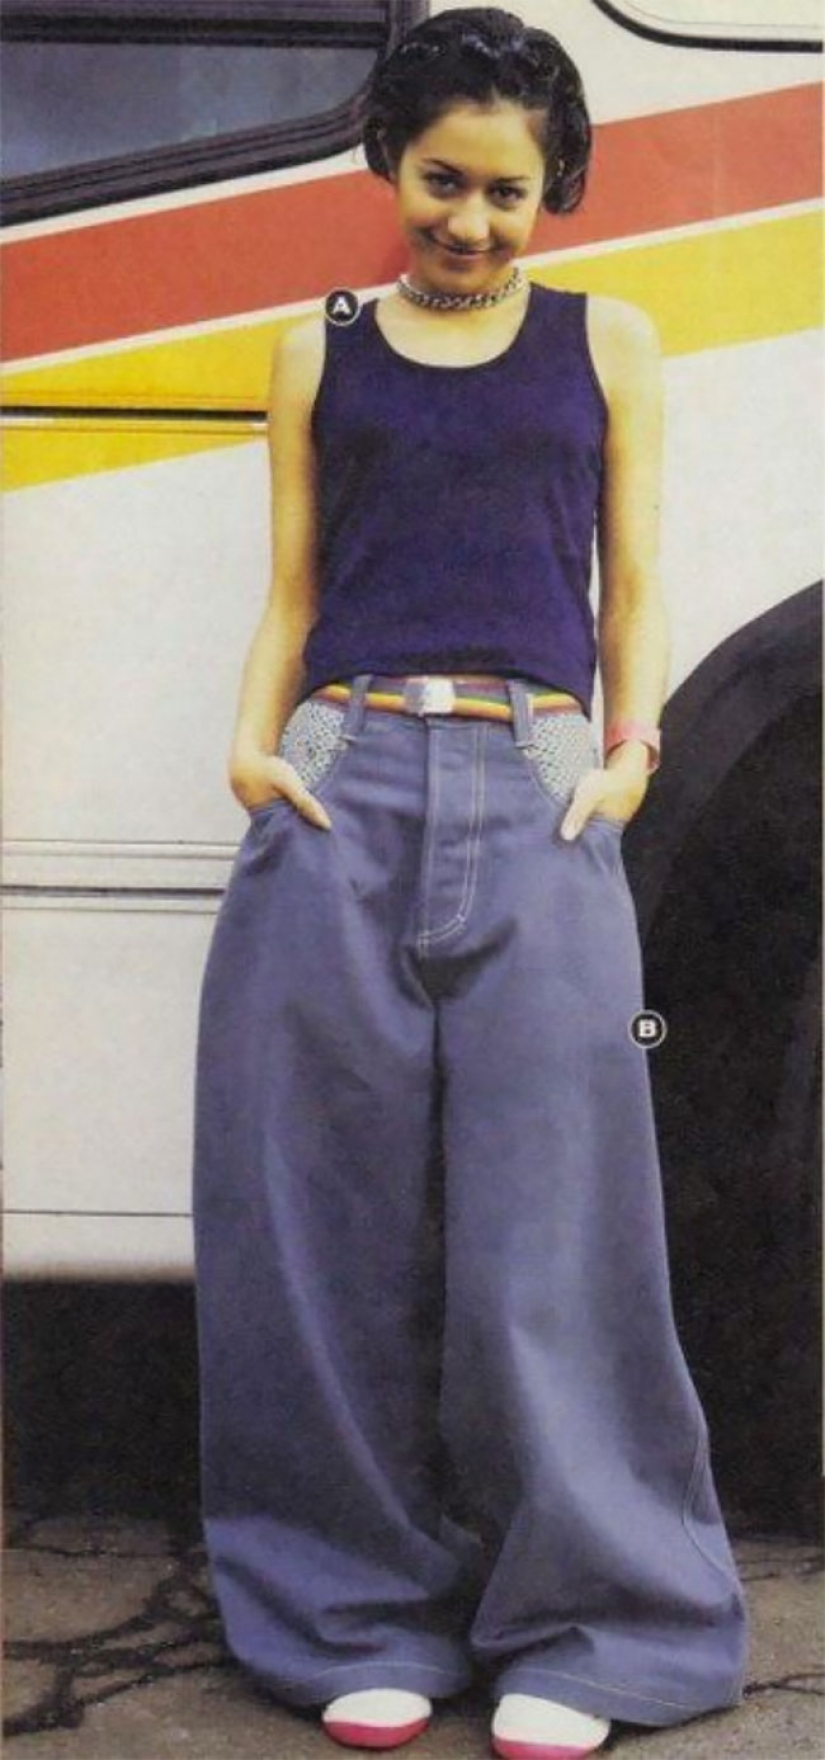 Jeans with wide legs: a strange fashion trend from the 90s, which is coming back again